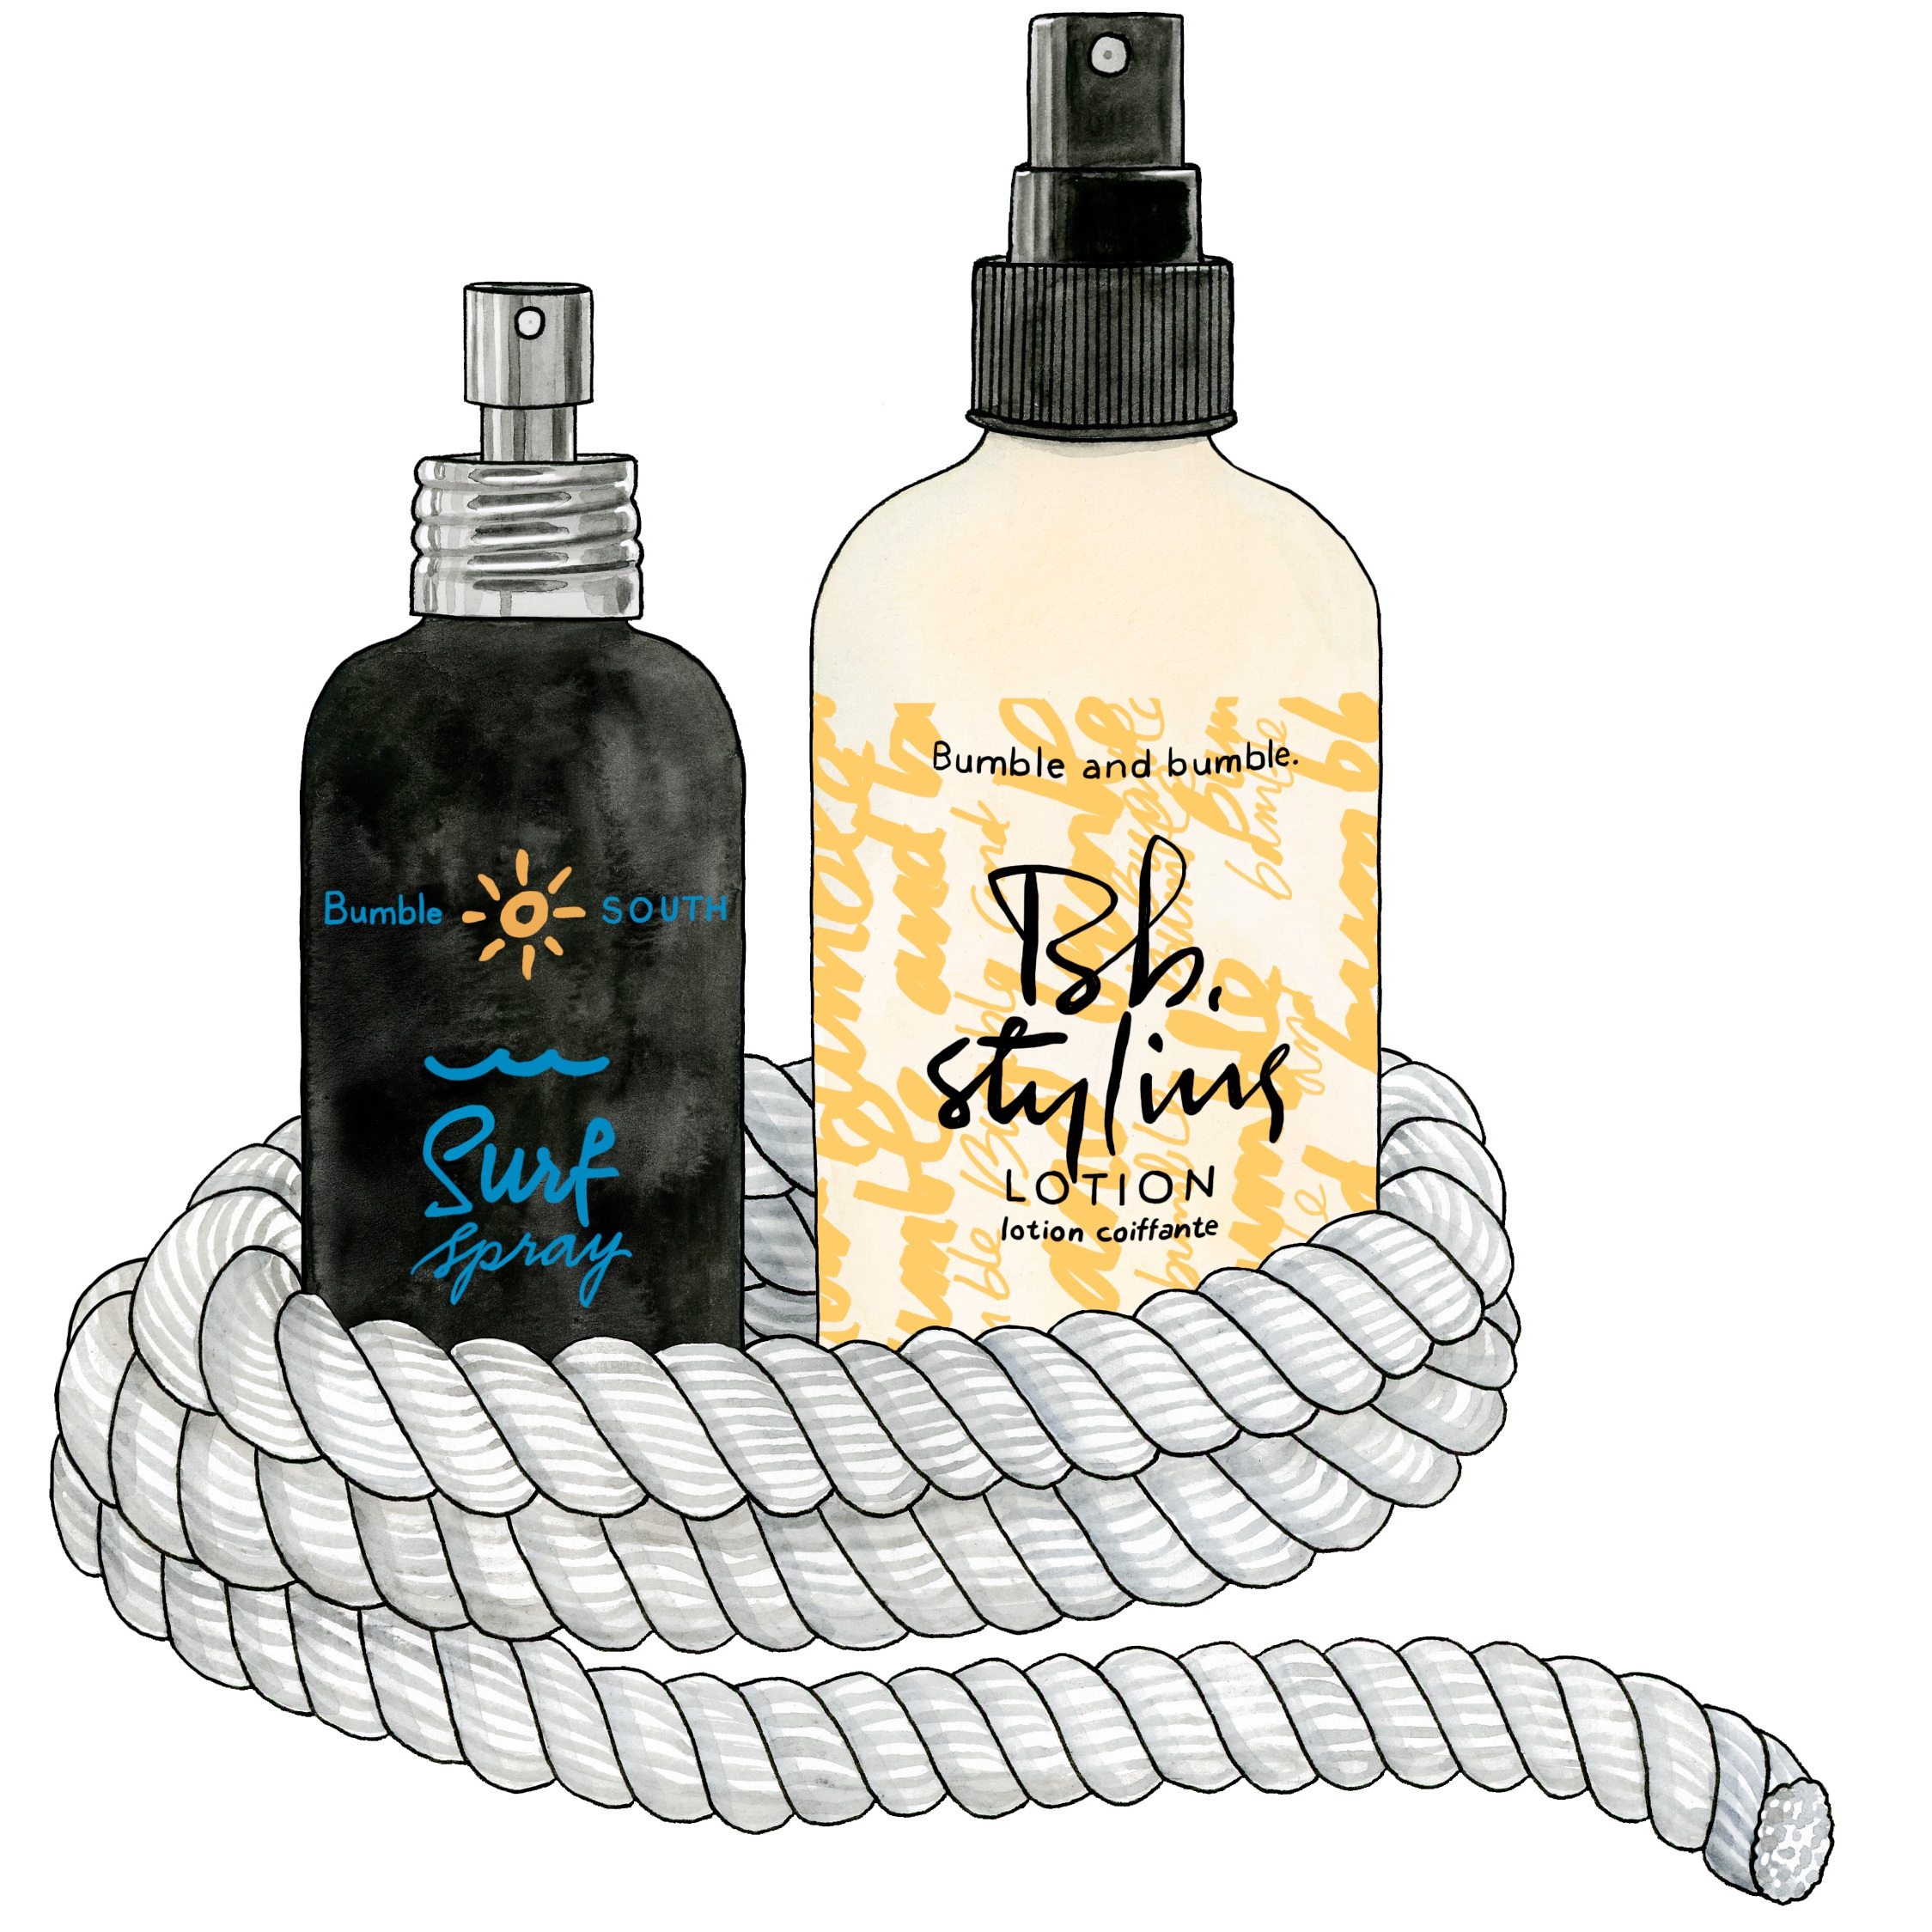 Bumble and bumble: Surf Spray 1